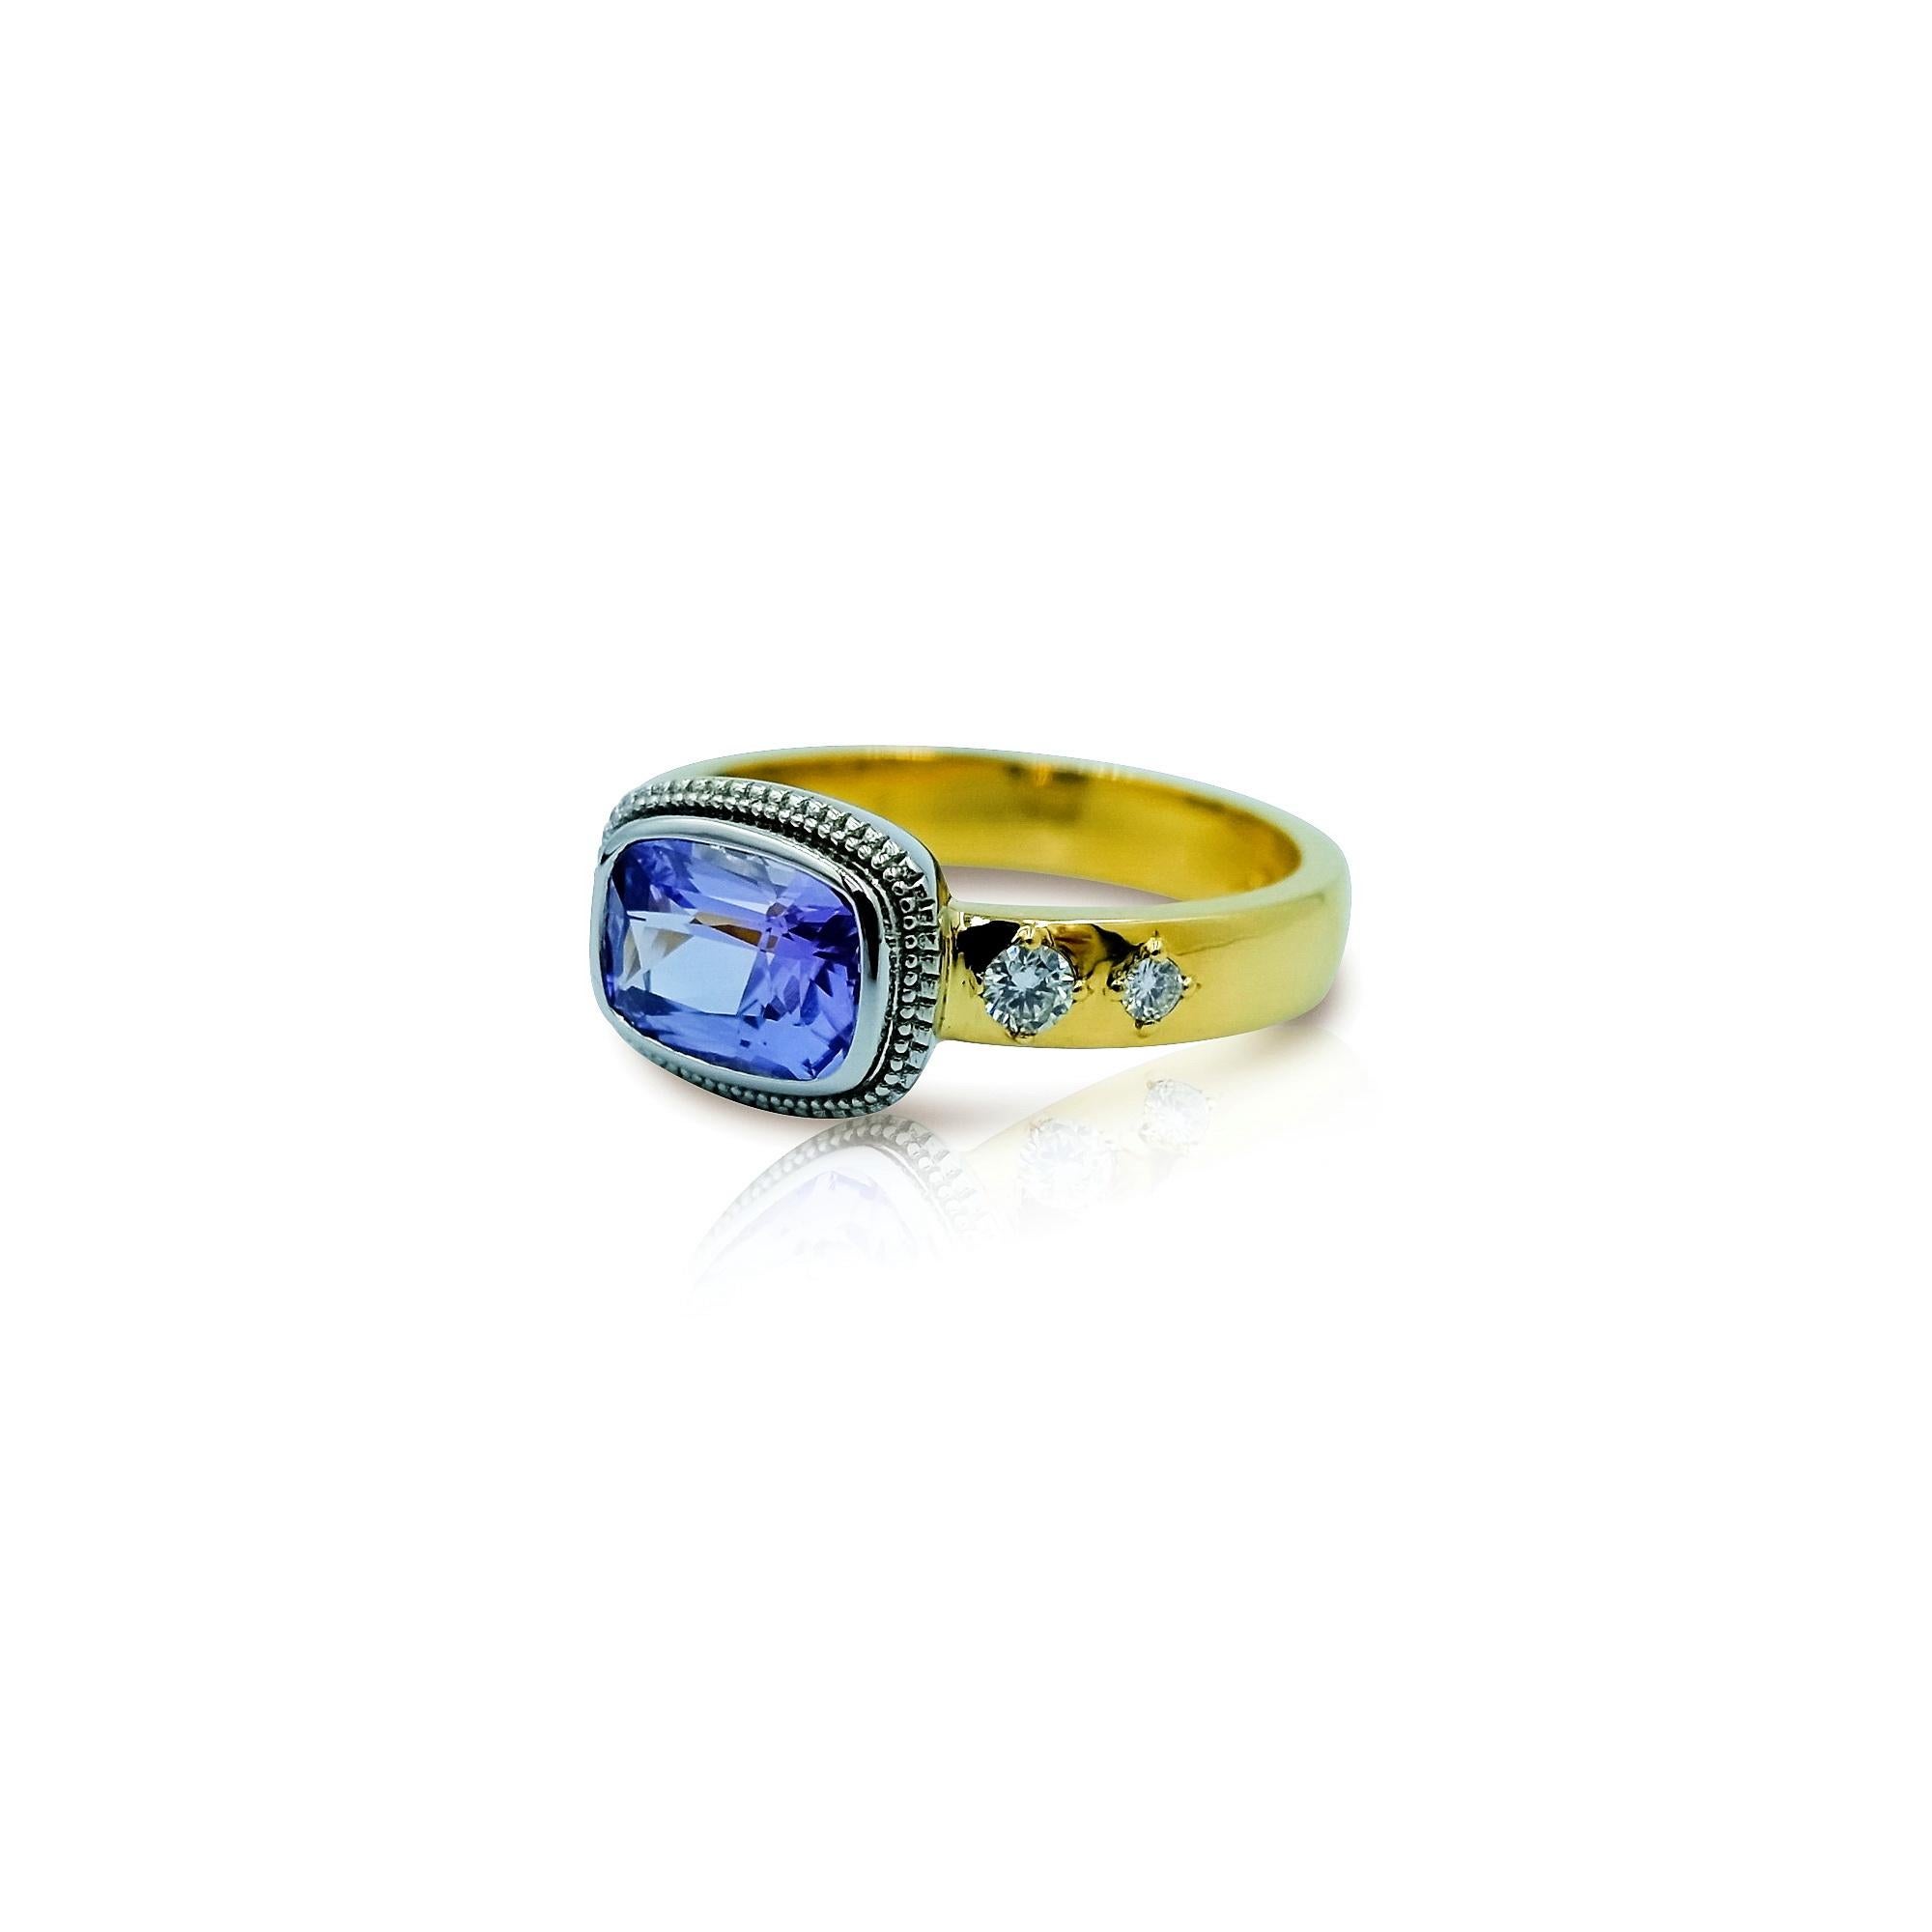 Cushion Cut Luca Jouel Violet Sapphire and Diamond Ring in Platinum and Yellow Gold